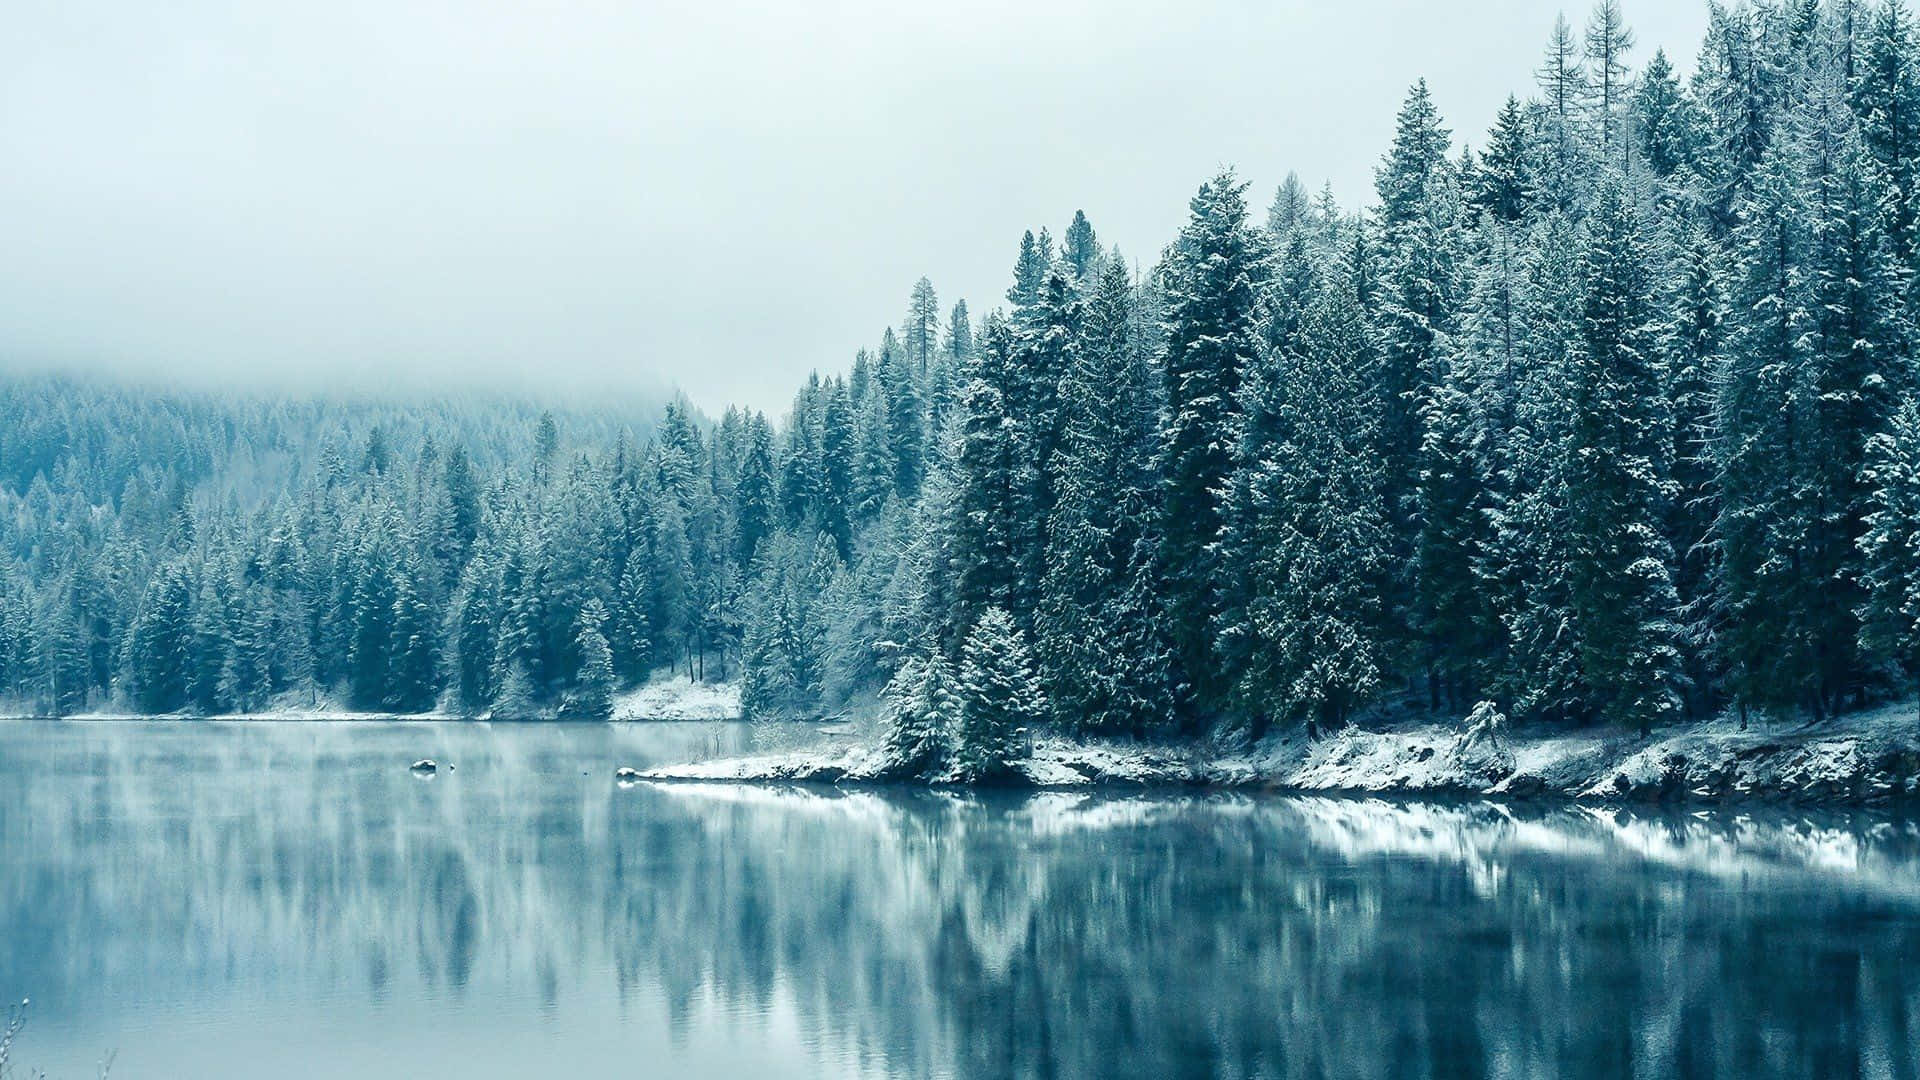 Crystal-clear Lake Cozy Winter Aesthetic Landscape Photography Wallpaper